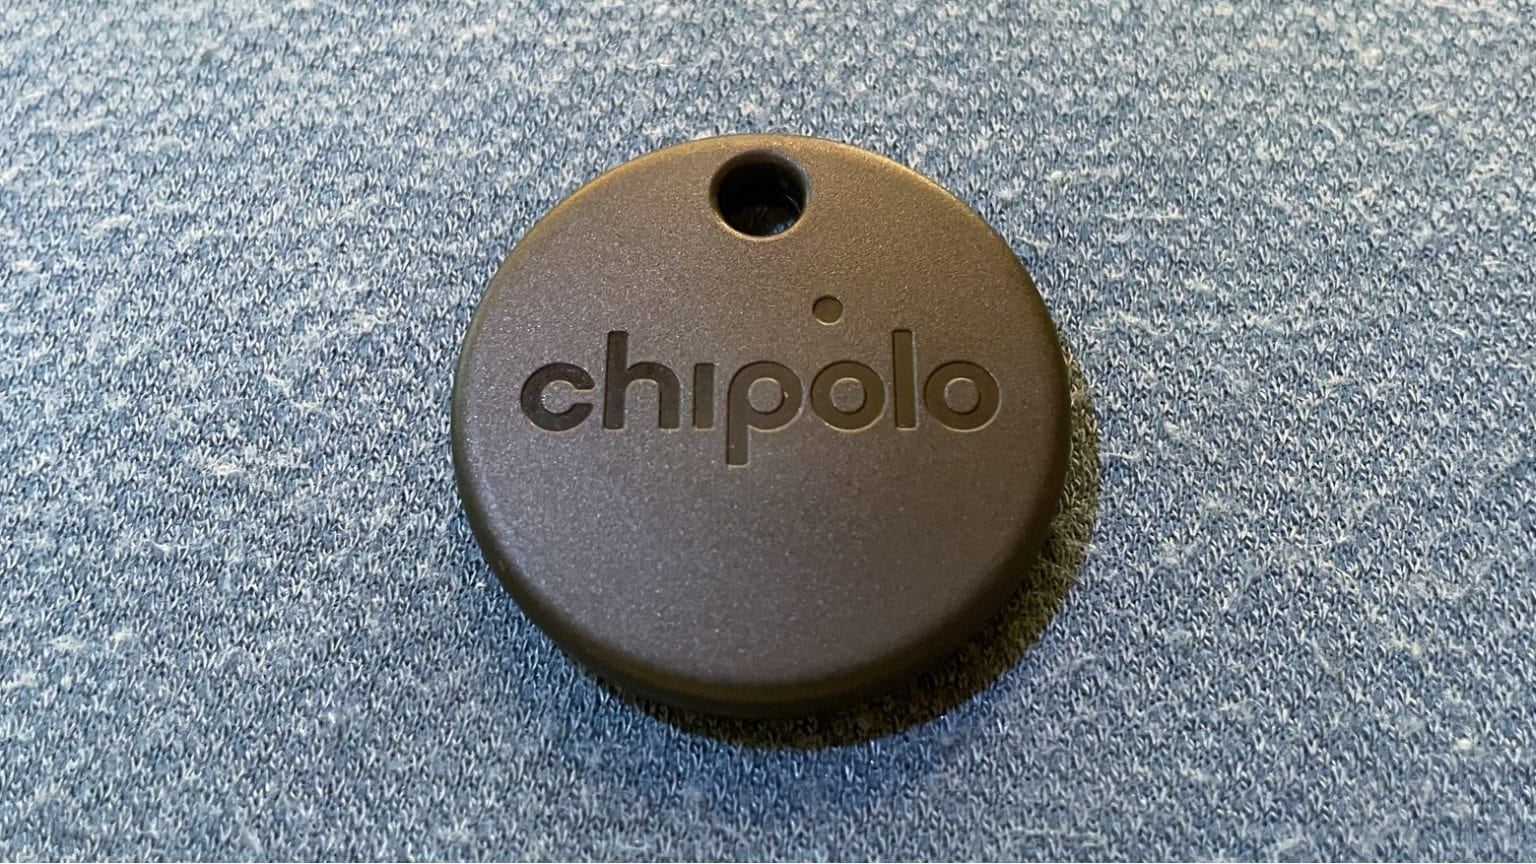 Chipolo One Spot review